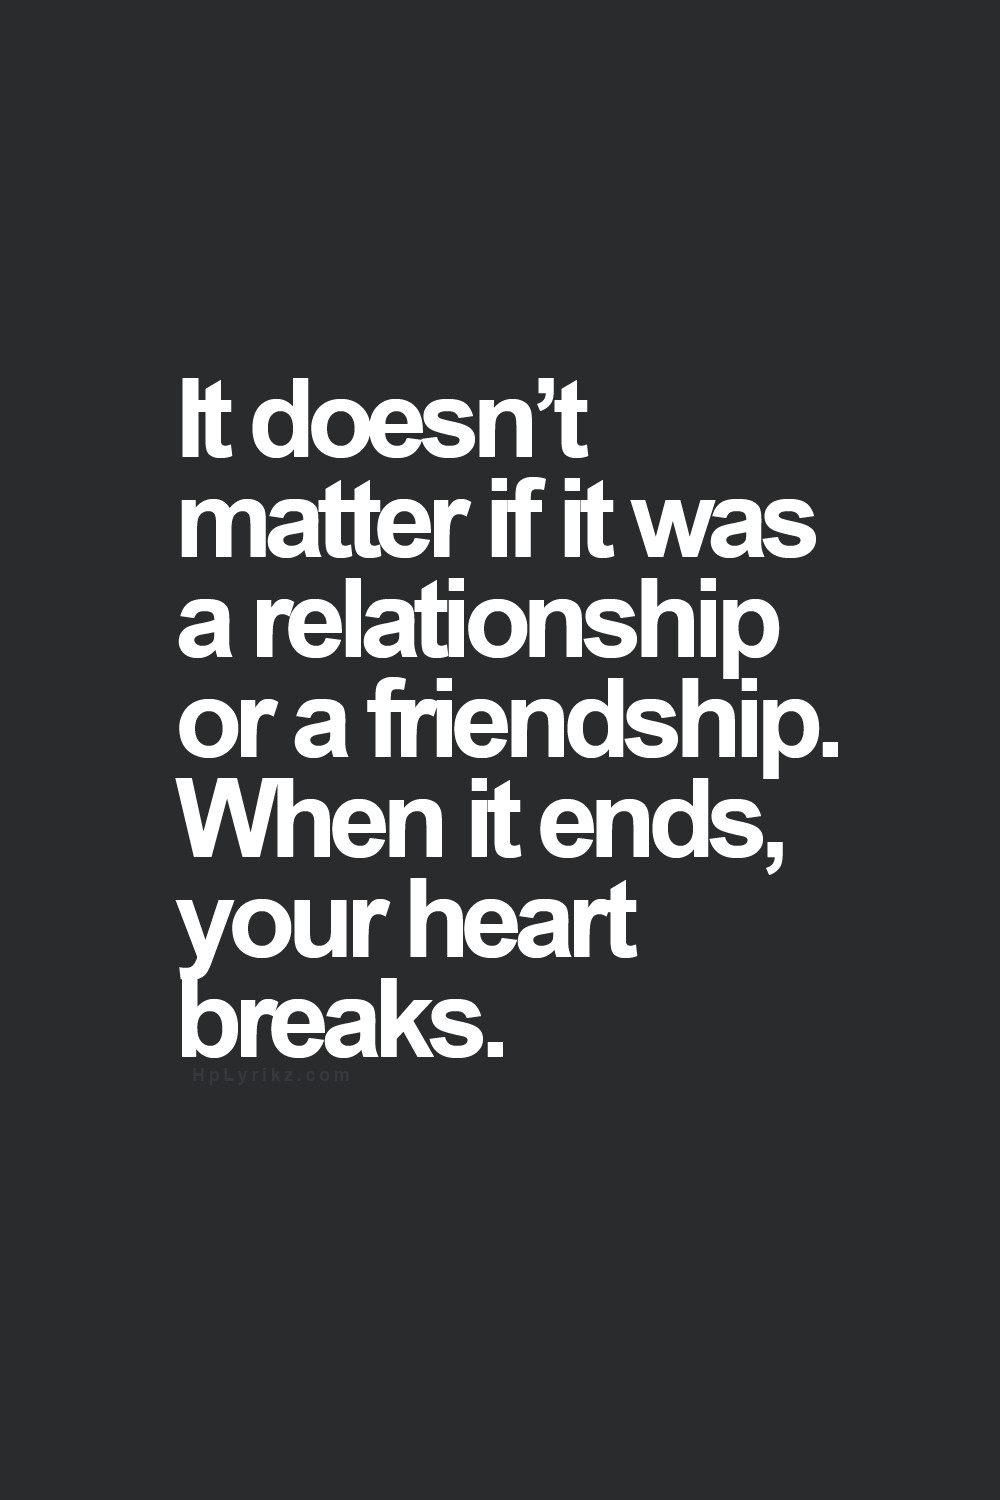 Sad Quotes About Breakup
 Sad Friendship Break Up Quotes Daily Quotes Pics